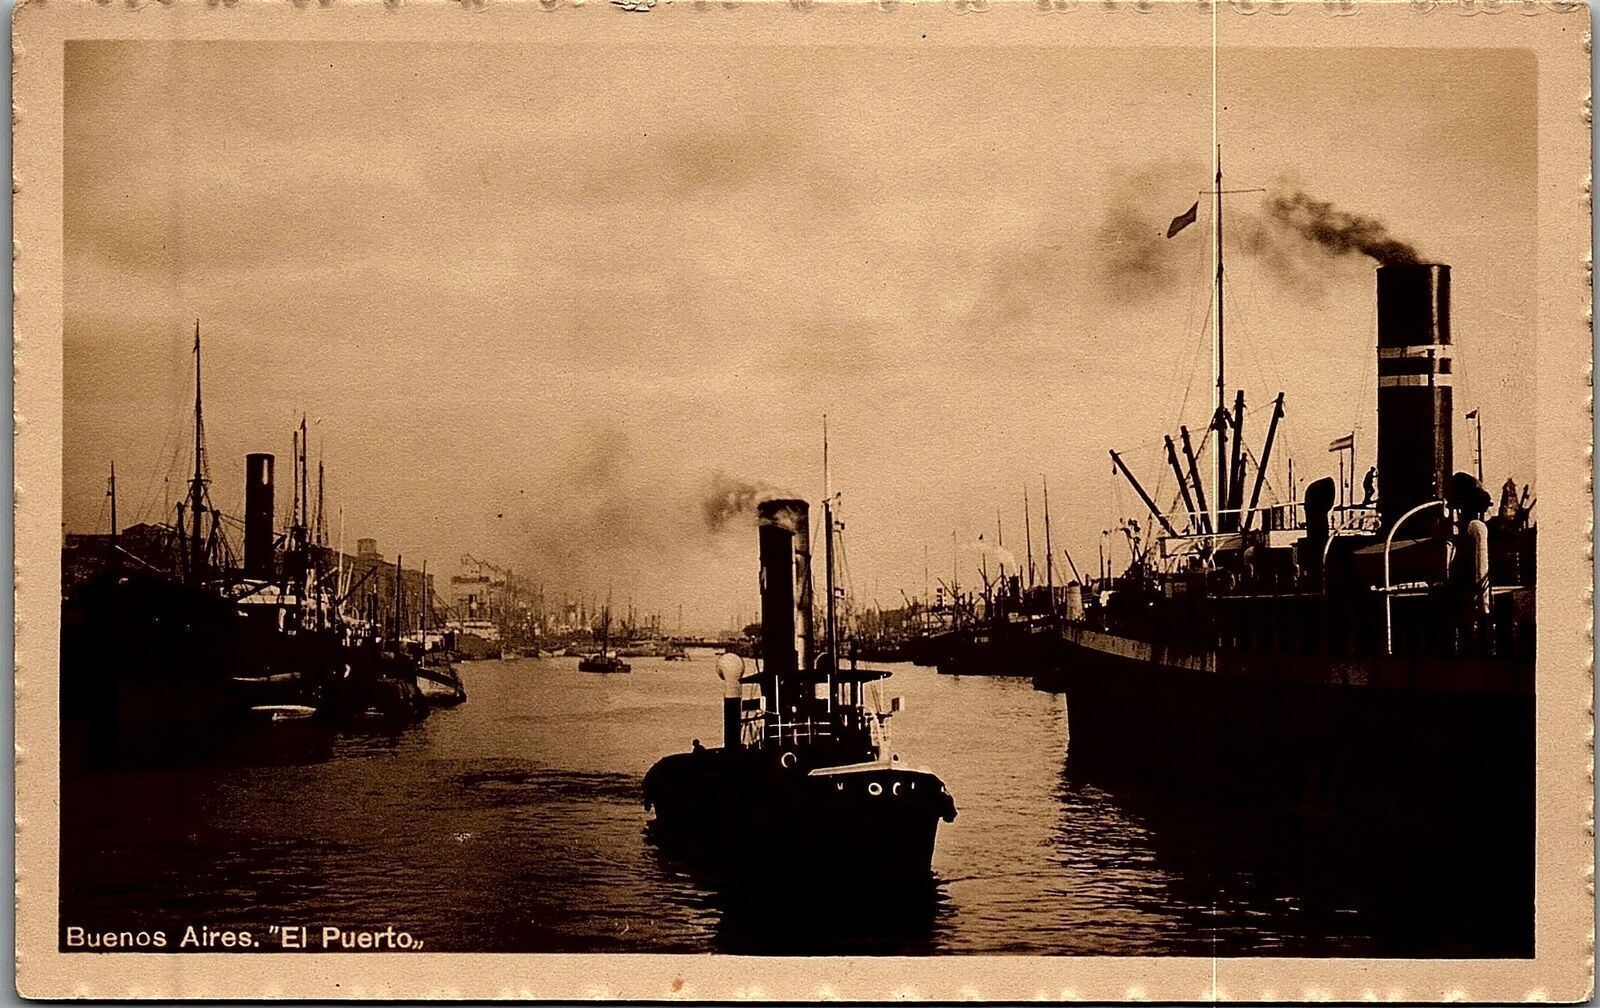 c1910 BUENOS AIRES BOATS SHIPS AT PORT UNPOSTED LITHOGRAPHIC POSTCARD 29-104